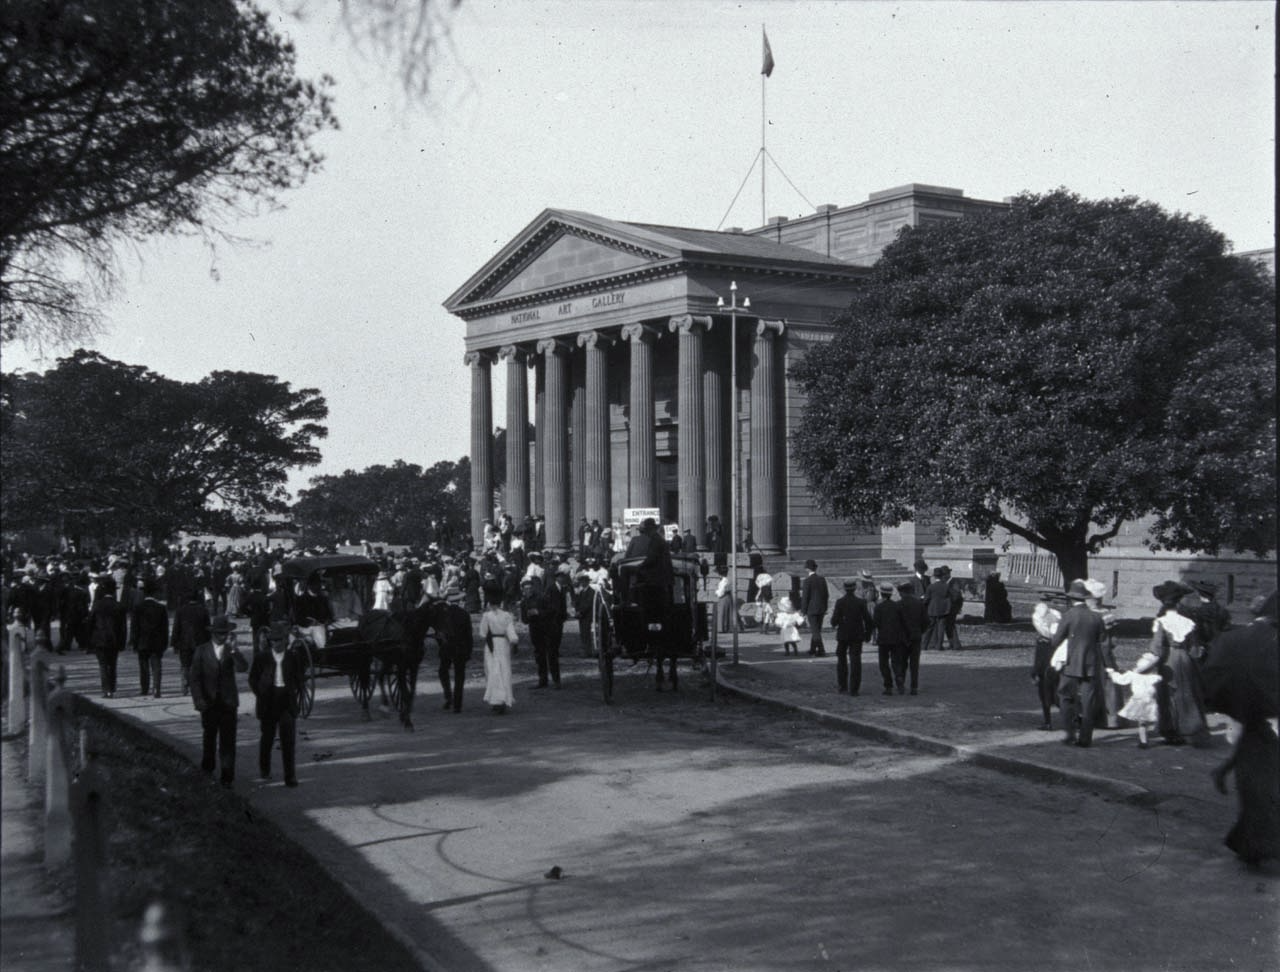 Crowds at the Gallery in 1906, Art Gallery of New South Wales archive